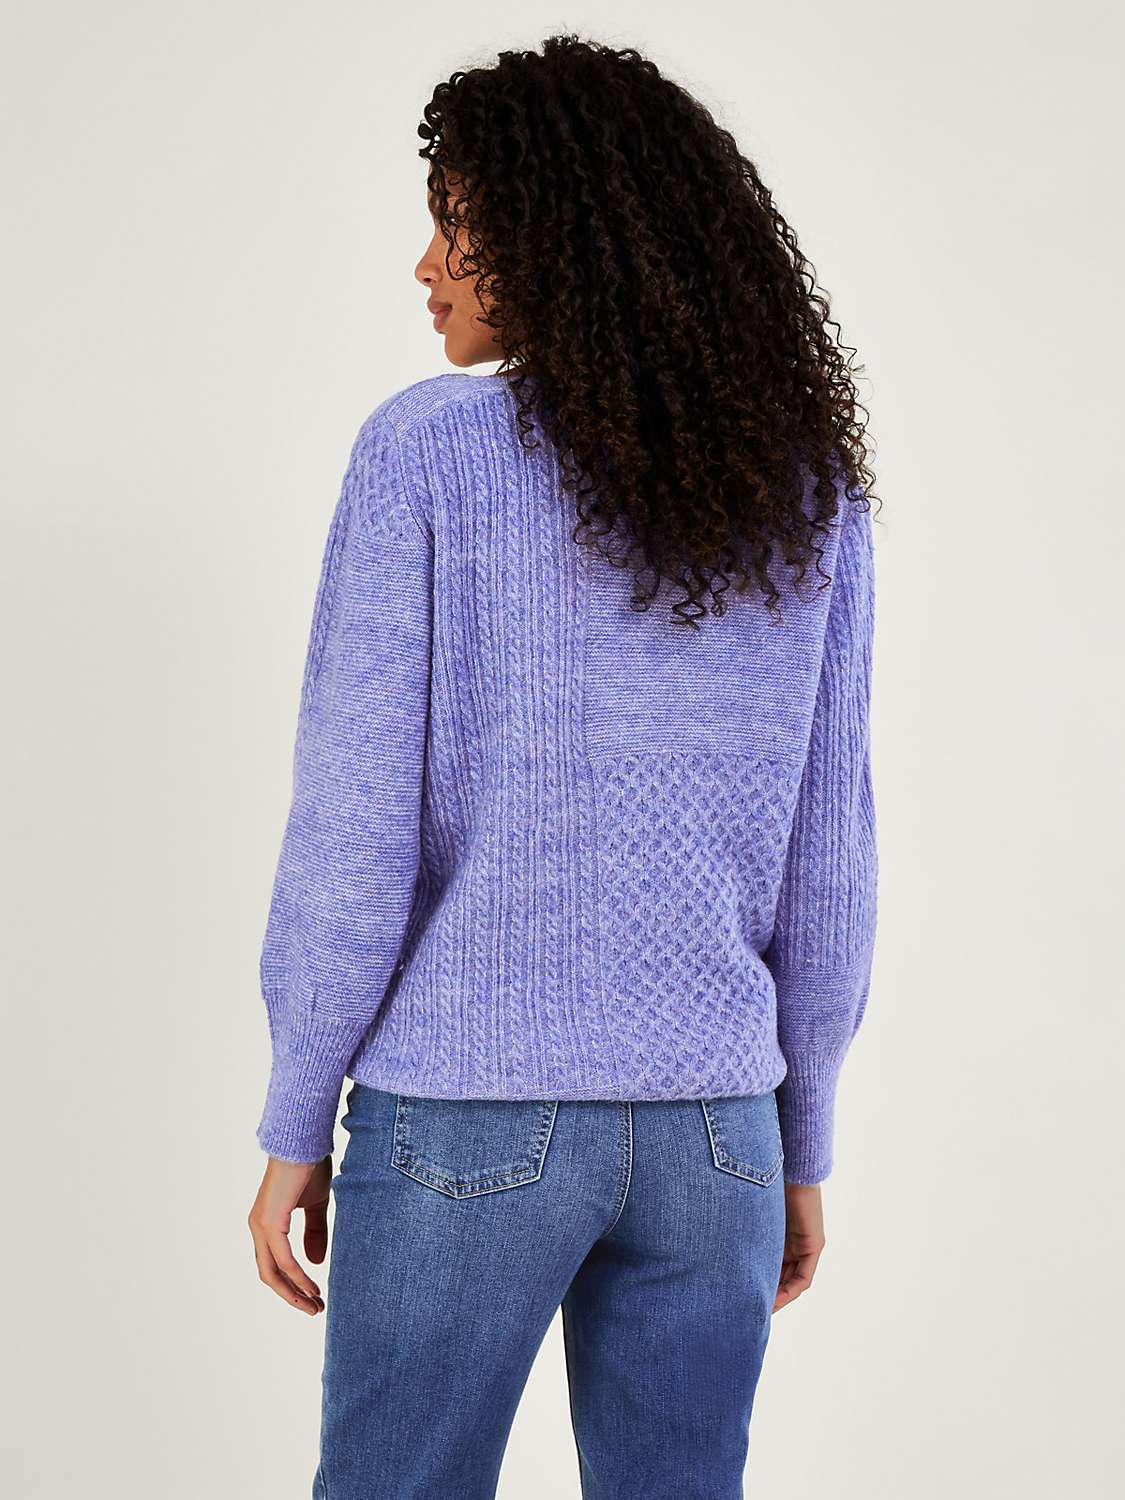 Monsoon Supersoft Patch Stitch Tunic Jumper, Blue at John Lewis & Partners